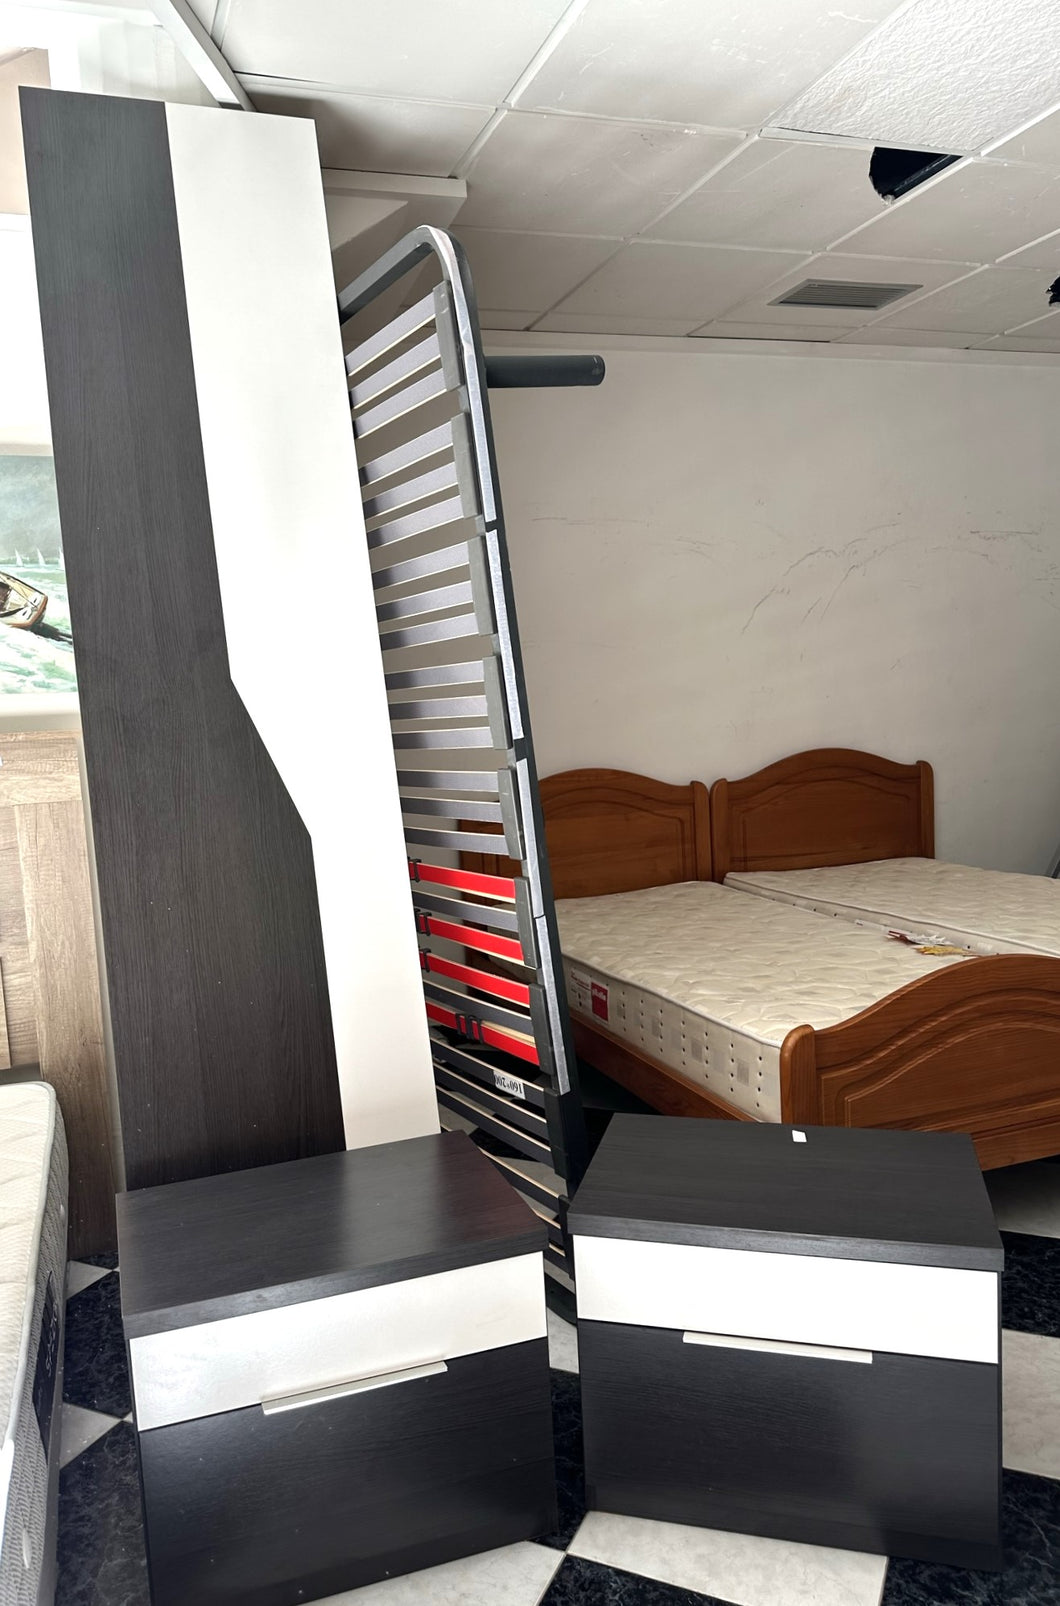 1078 - Set of headboard (to mount on wall) + 2 bedsides (58cm x 40cm, 48cm high) 95€ for all three!